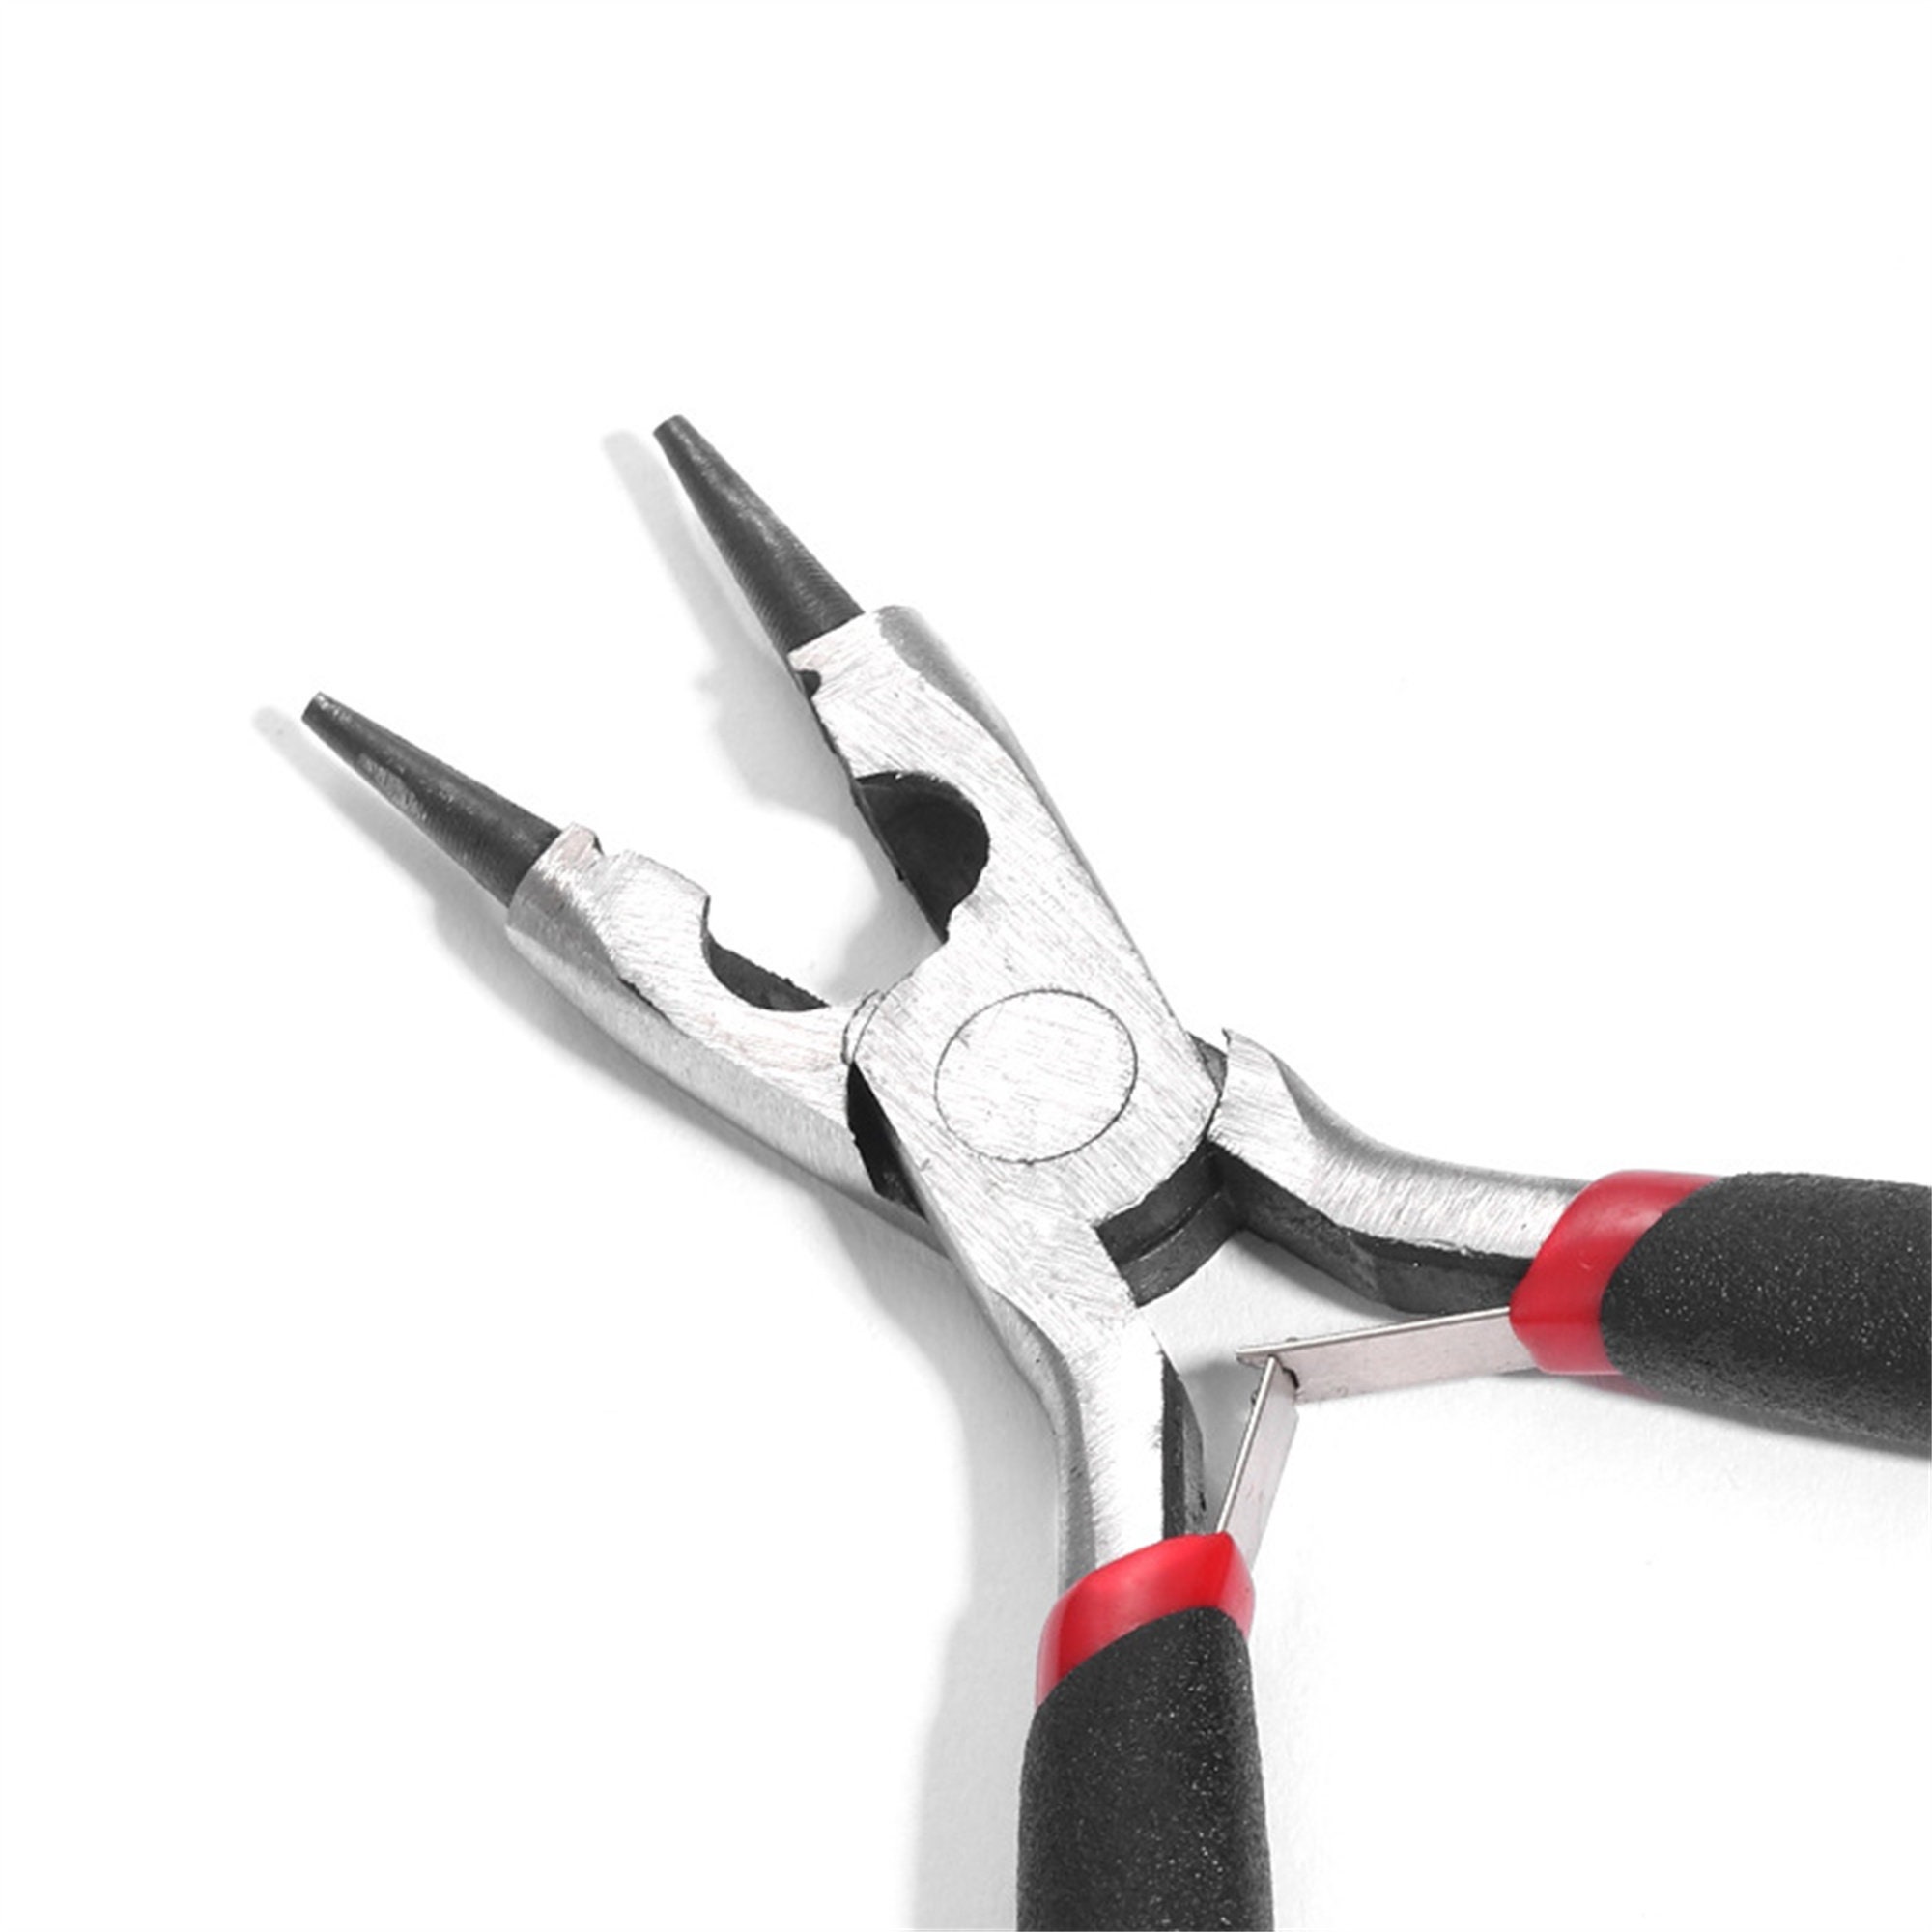 Chain Nose Pliers, Fine Point Pliers, Jewelry Pliers, Small Jewelry Pliers,  Pliers for Findings, Pointed Pliers, Finding Pliers 